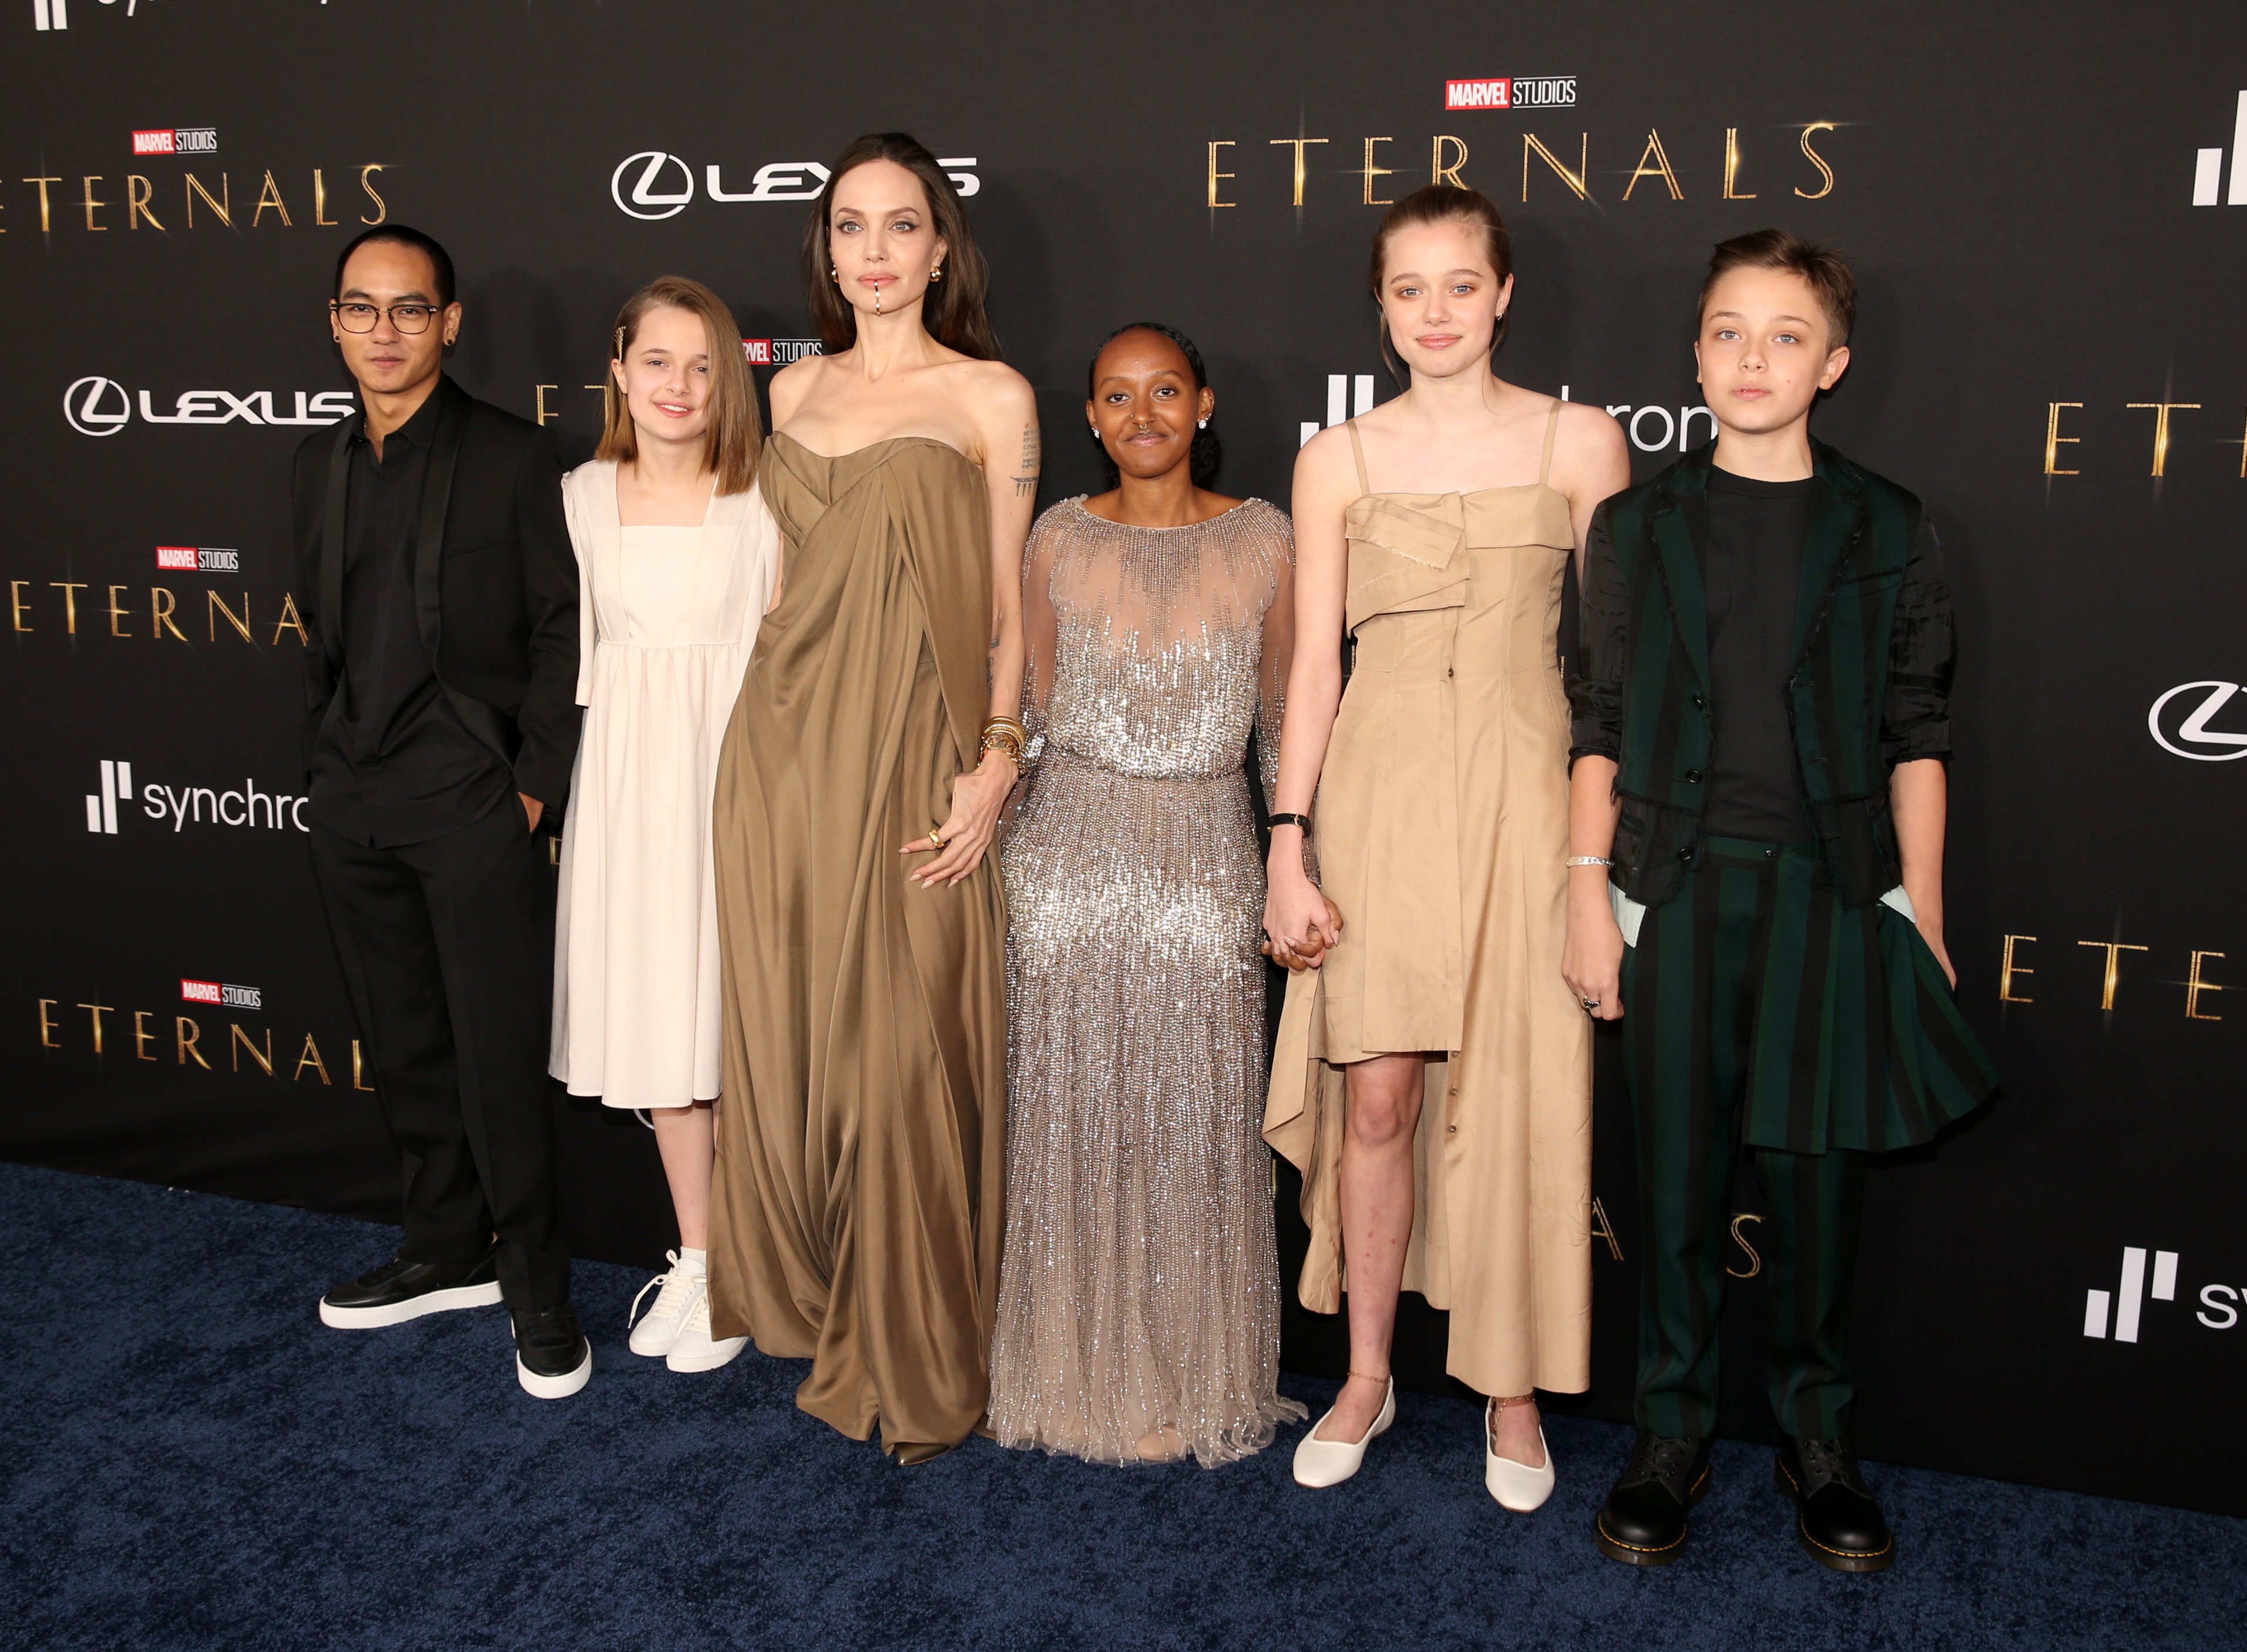 Maddox Jolie-Pitt, Vivienne Jolie-Pitt, Angelina Jolie, Zahara Jolie Pitt, Shiloh Jolie-Pitt, and Knox Jolie Pitt arrive at the Premiere of Marvel Studios' "Eternals" on October 18, 2021 in Hollywood, California. | Source: Getty Images